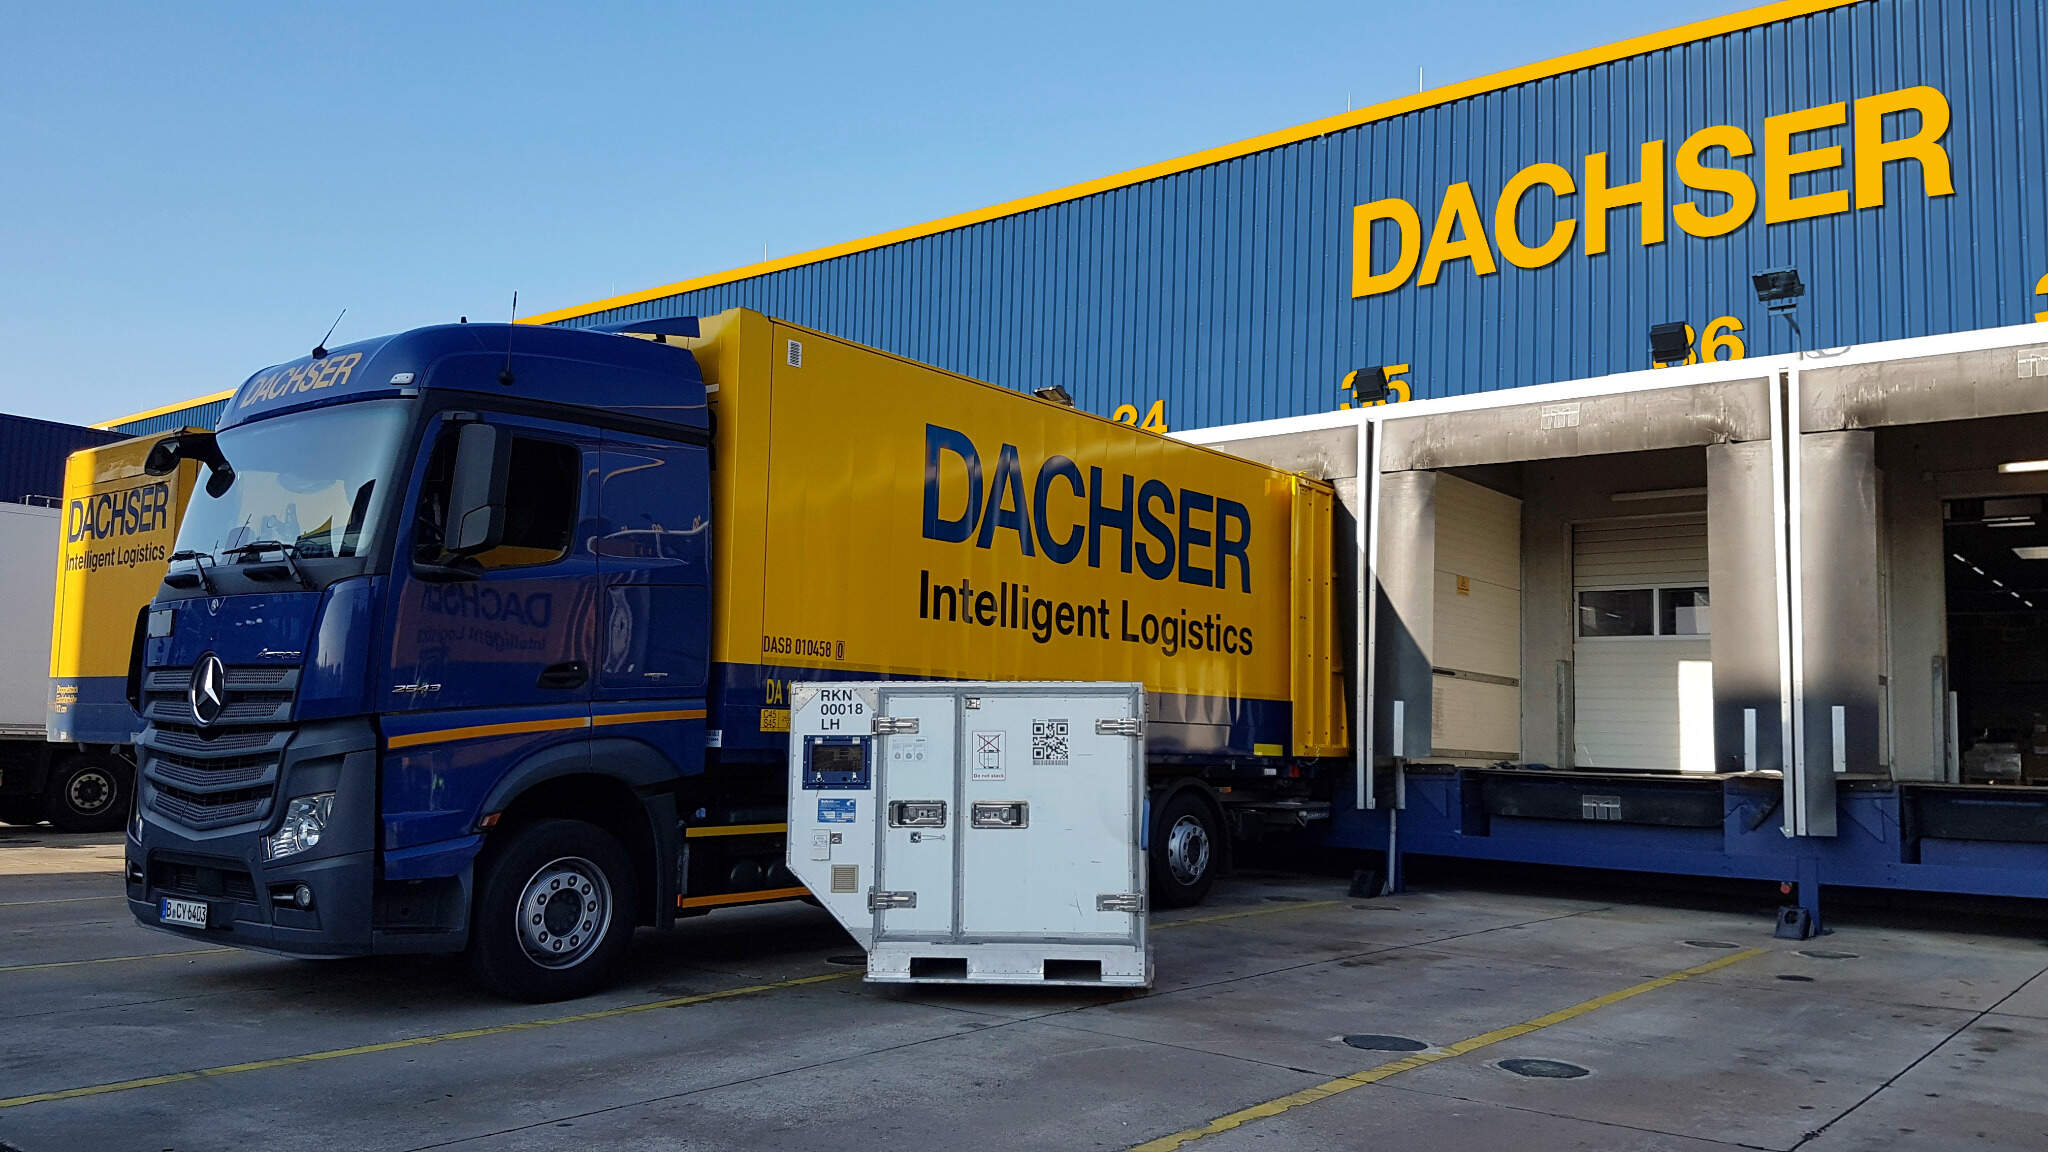 
DACHSER Air & Sea Logistics certified for pharmaceutical shipments on three continents